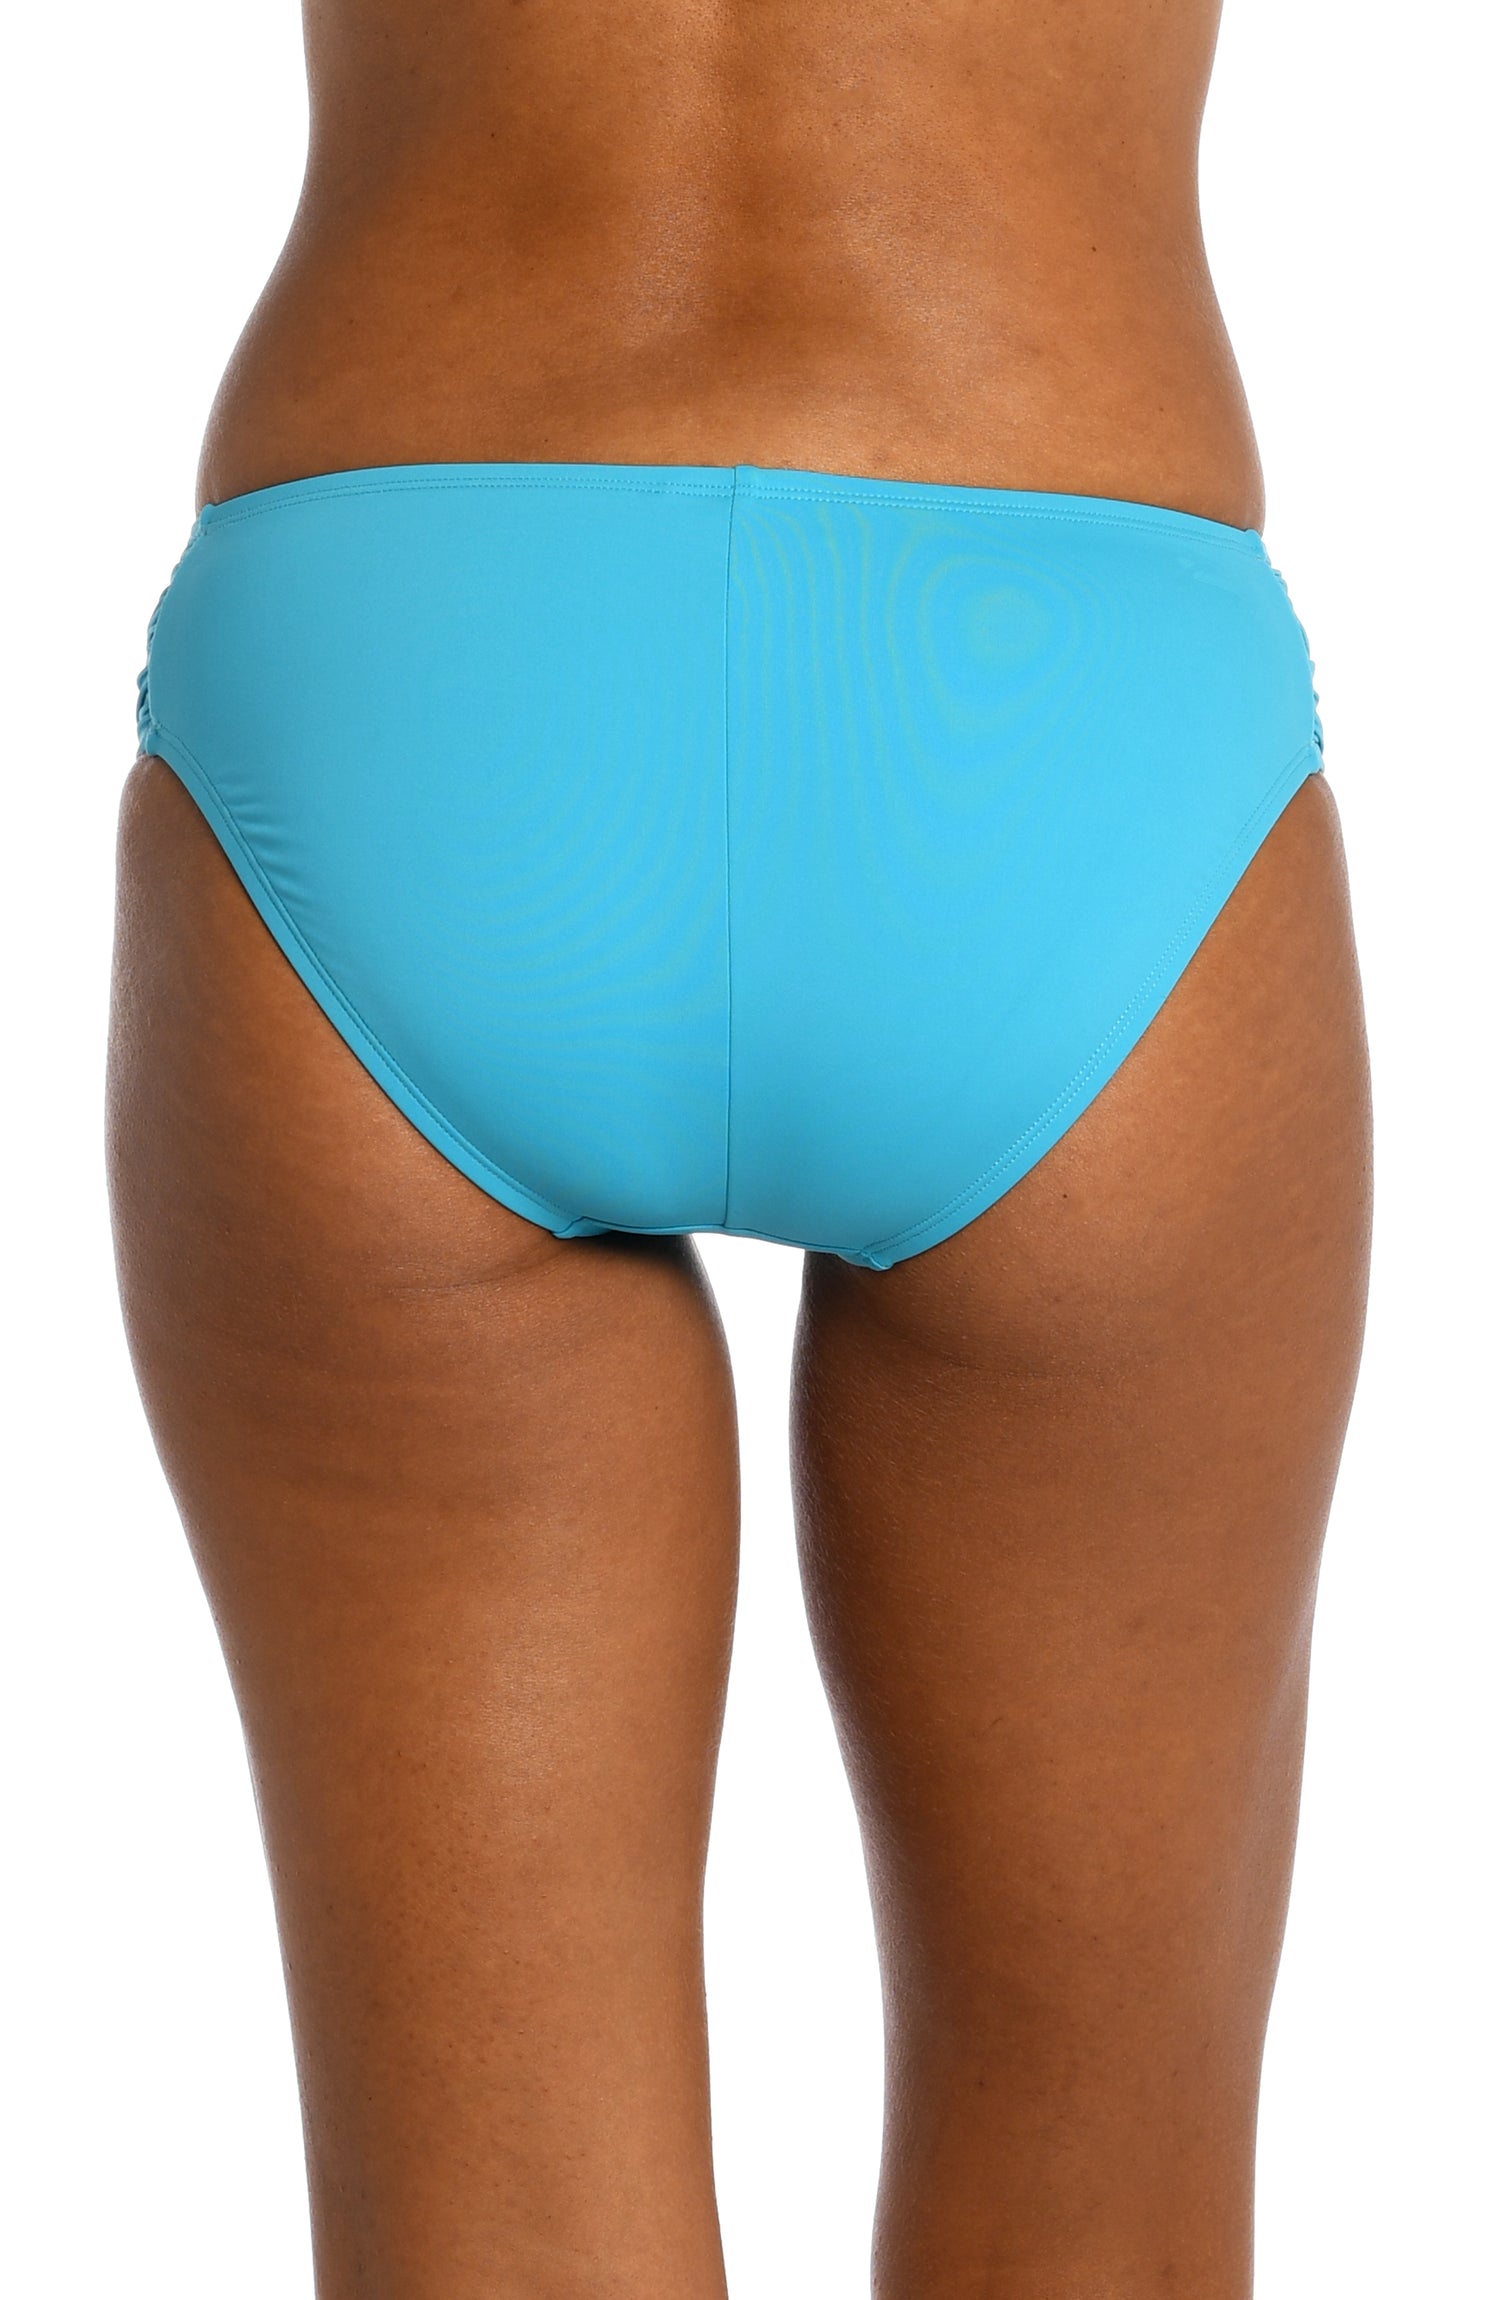 Model is wearing a azul (light blue) colored side shirred swimsuit bottom from our Best-Selling Island Goddess collection.